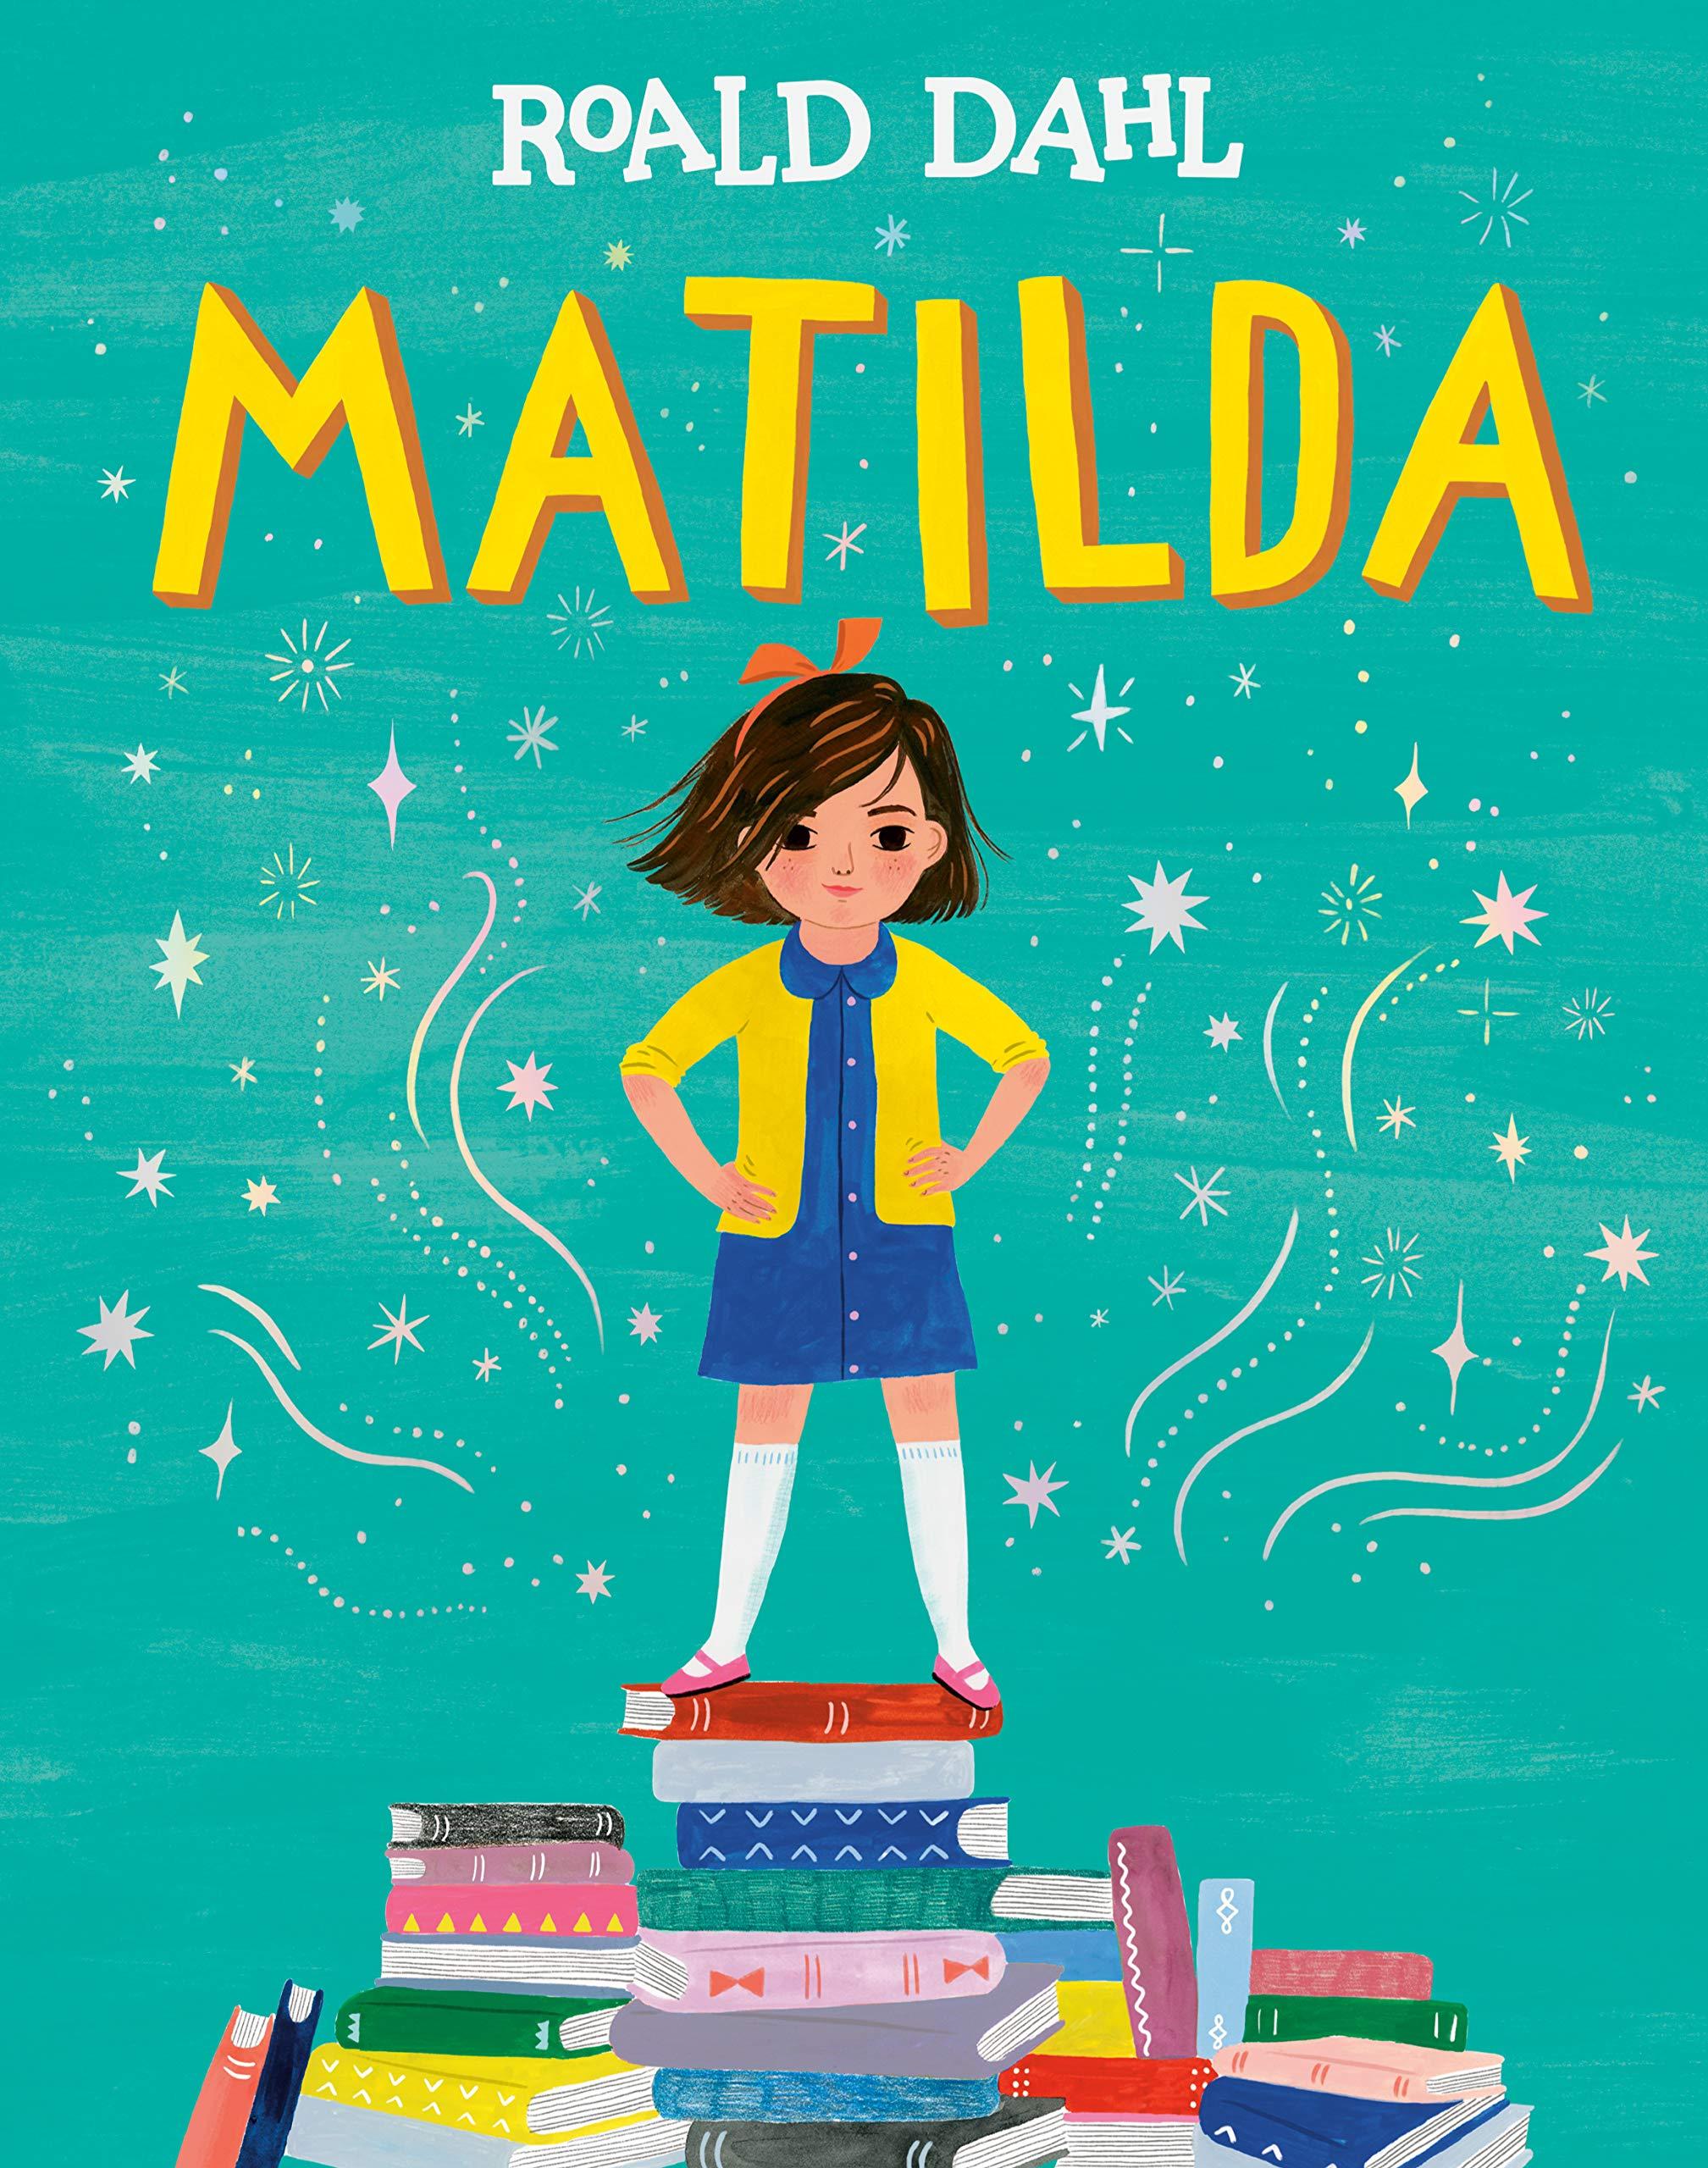 a book review on matilda